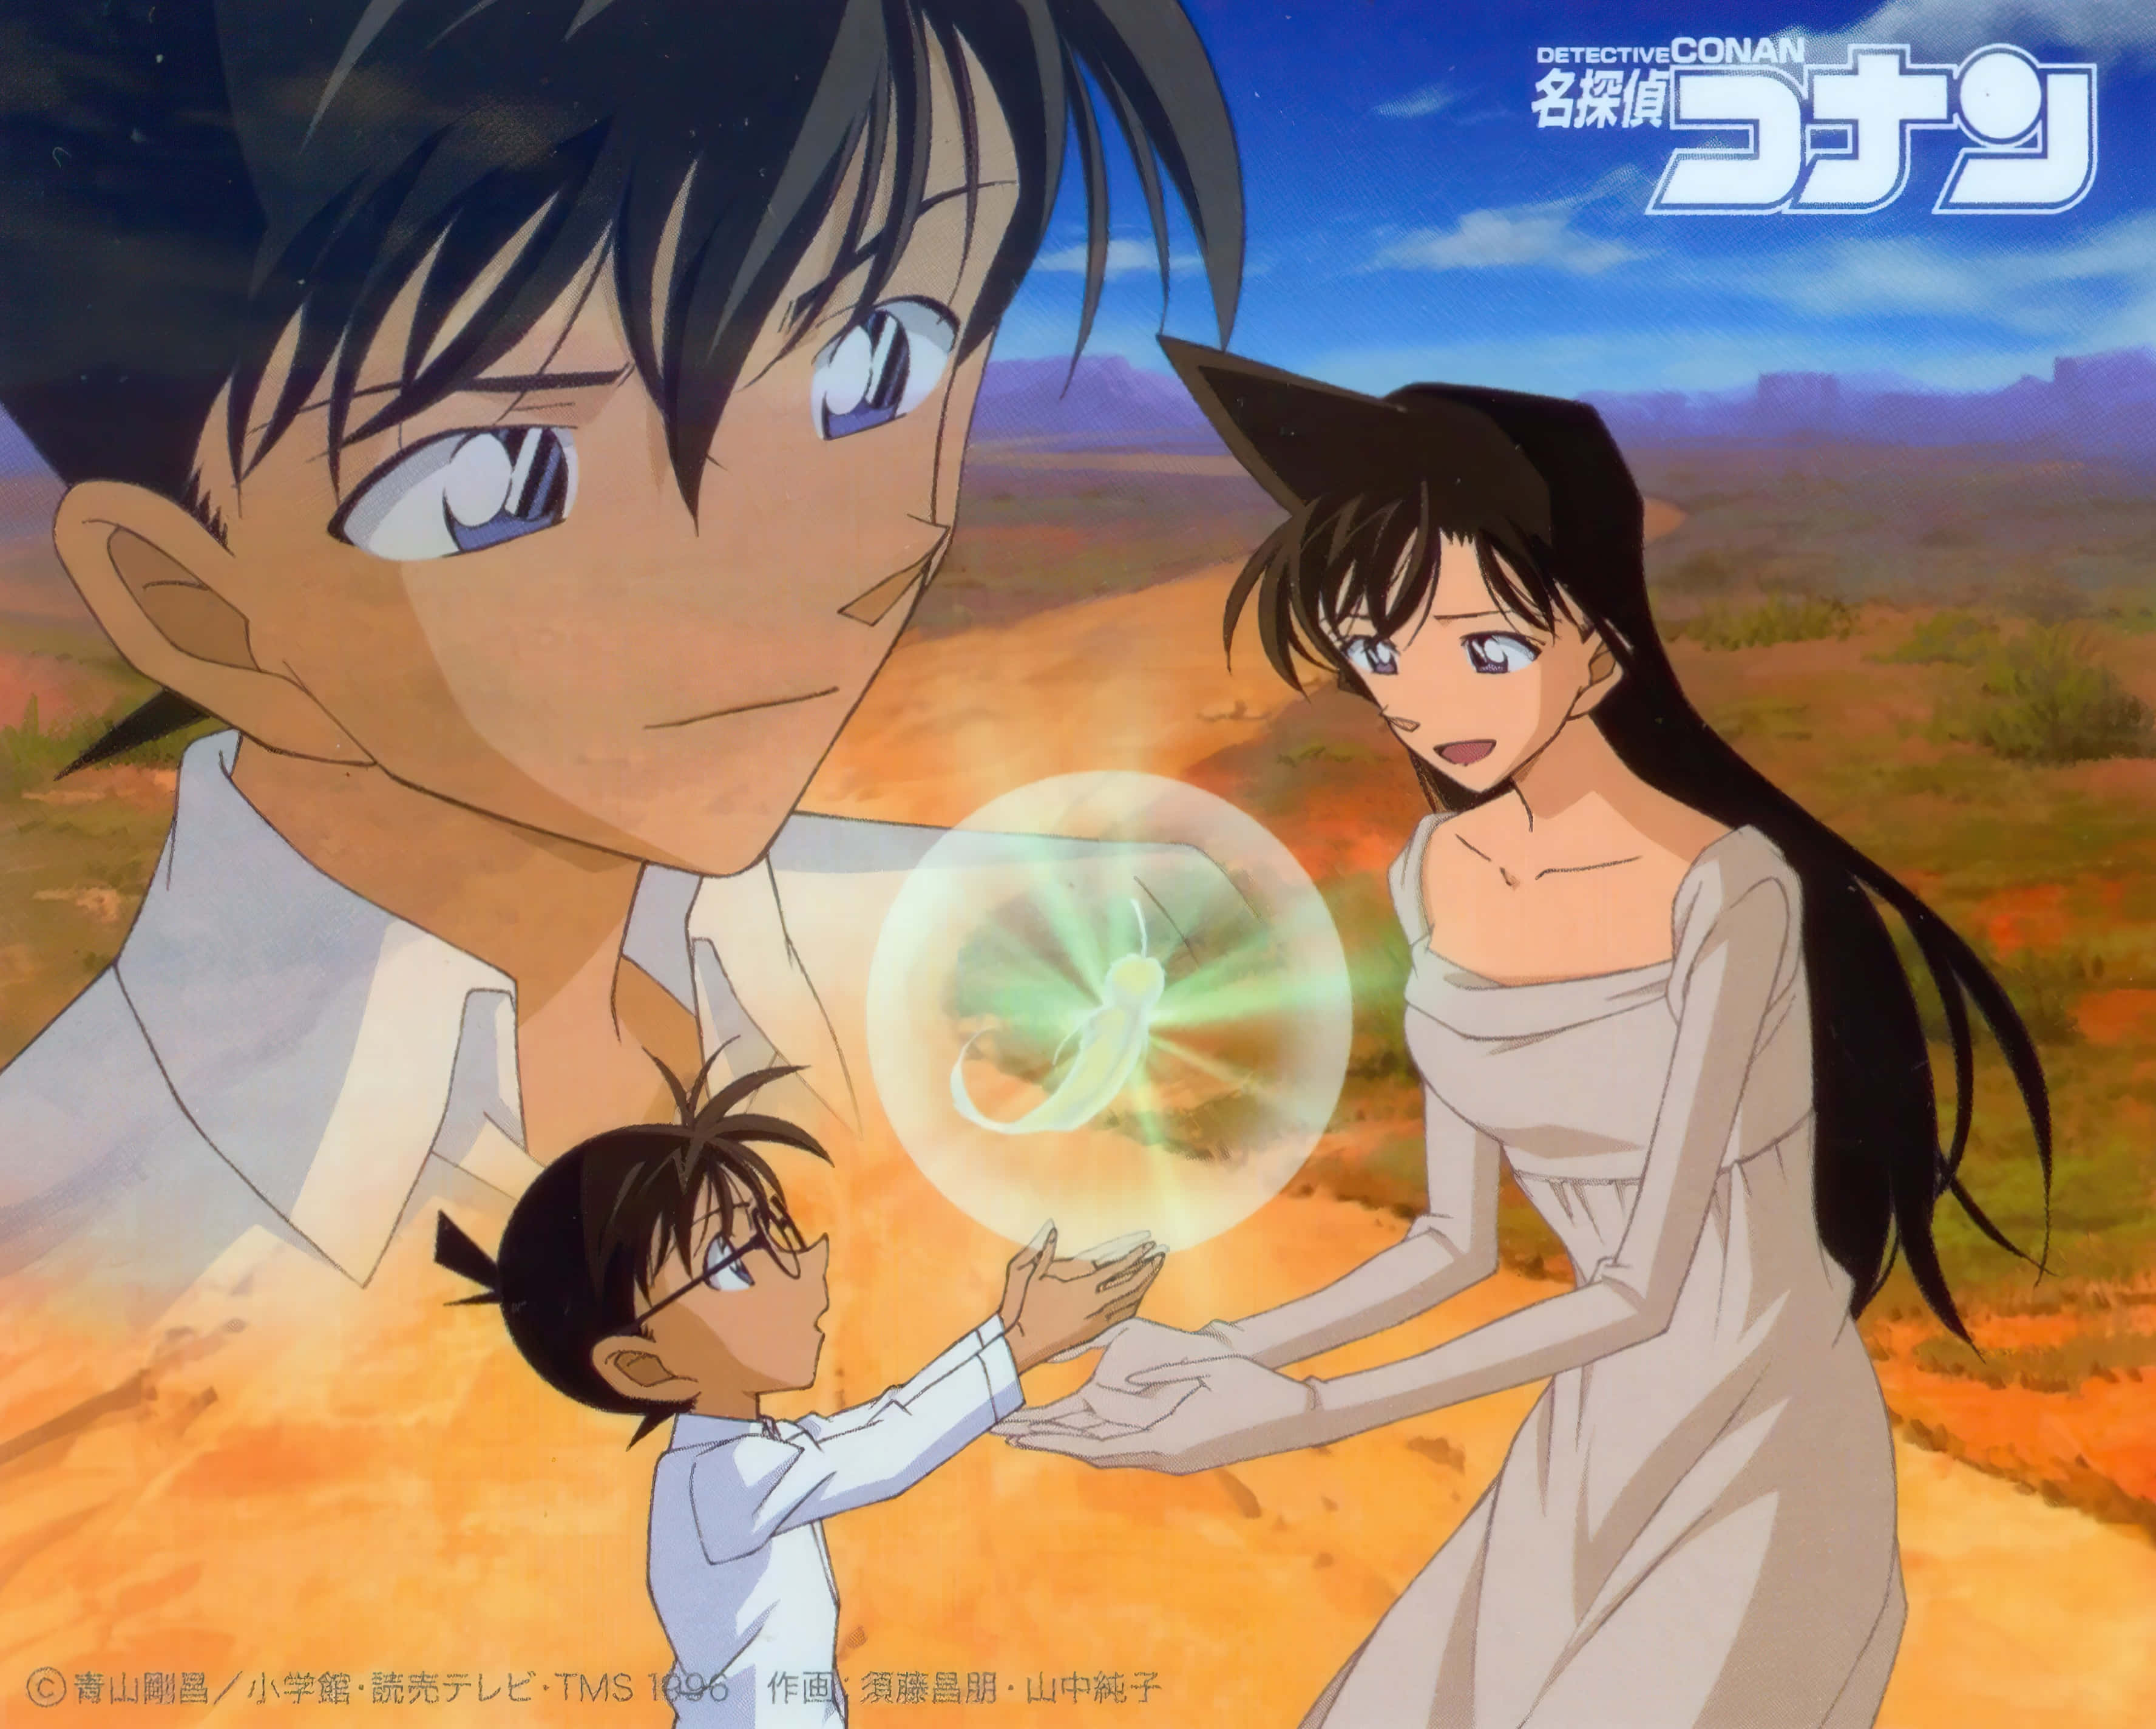 Follow the Clues&Solve the Mystery with Detective Conan